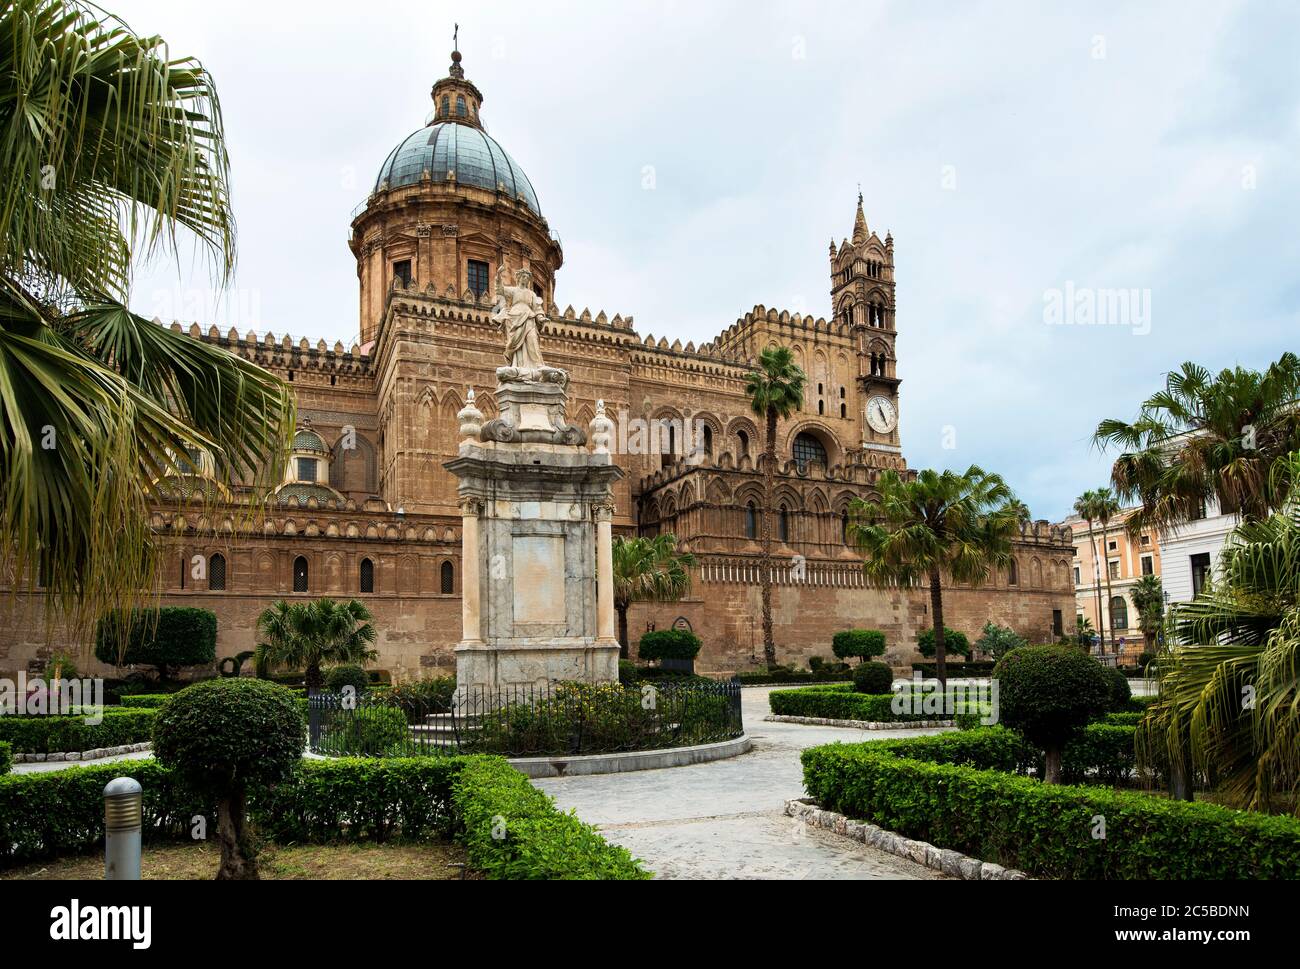 Cathedral of Palermo is one of the most important architectural monuments in Sicily; built in 1184 by the Normans on a Muslim Mosque, Sicily, Italy Stock Photo